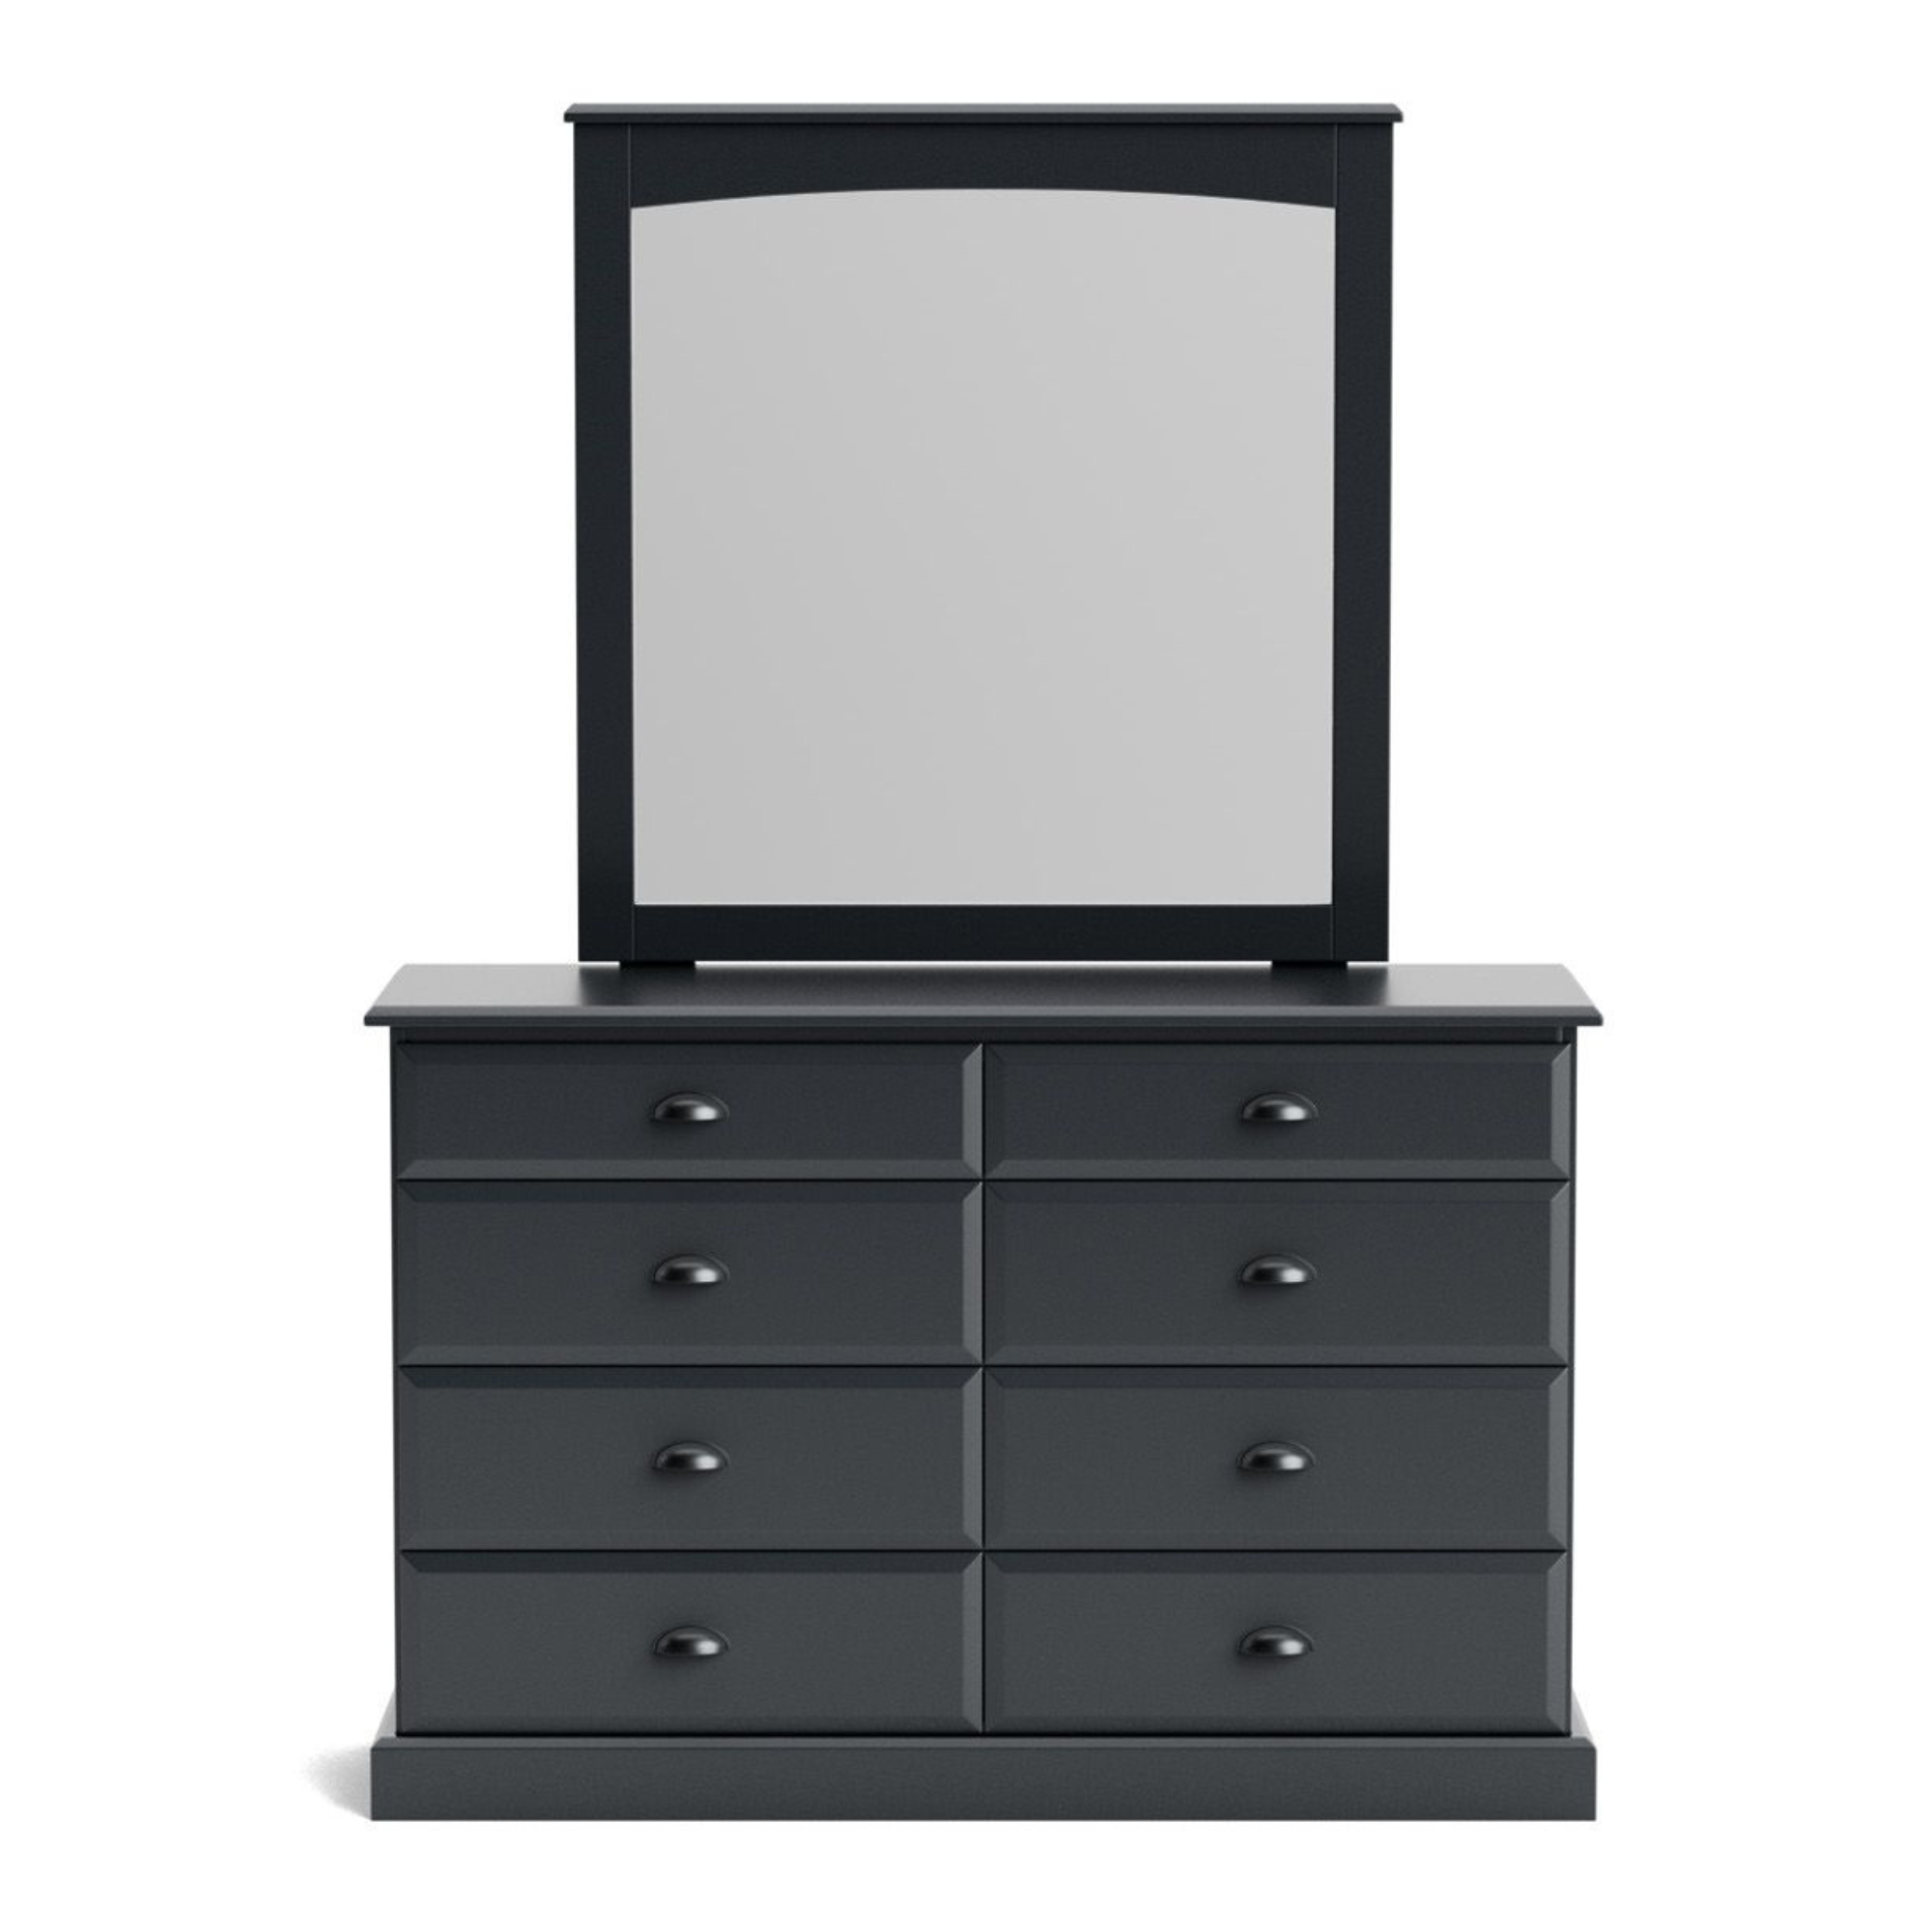 ANDORRA 8 DRAWER DUCHESS WITH MIRROR | NZ MADE BEDROOM FURNITURE